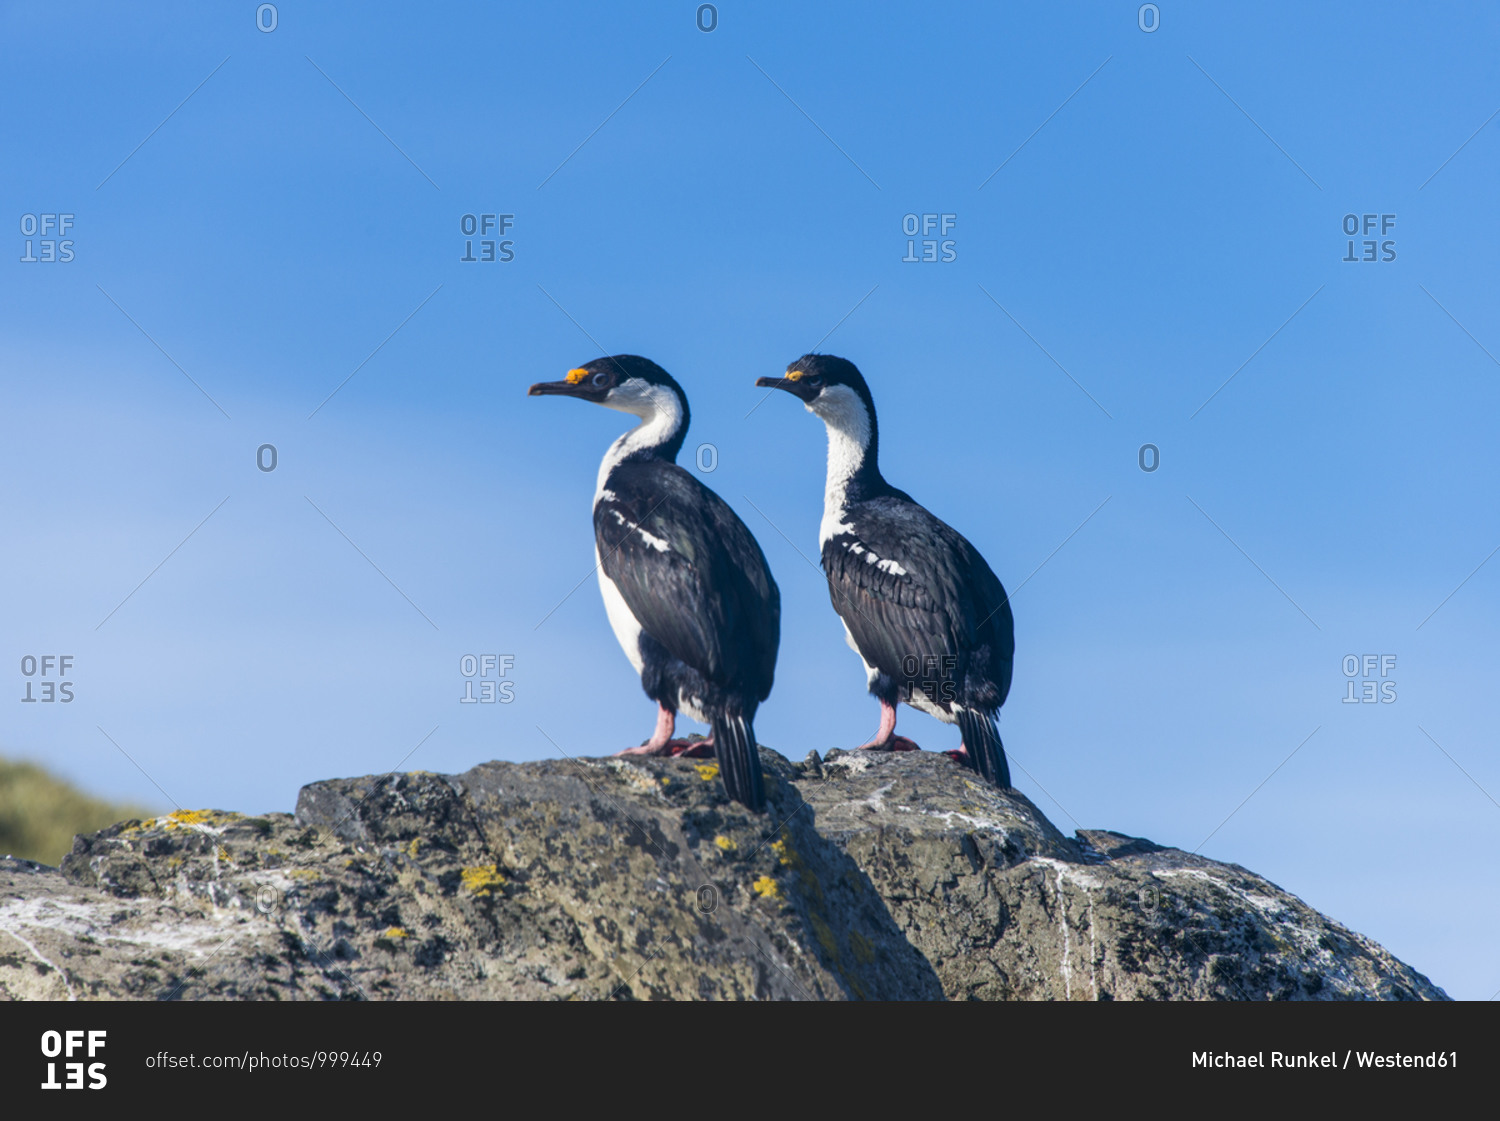 Two imperial shags (Leucocarbo atriceps) standing side by side